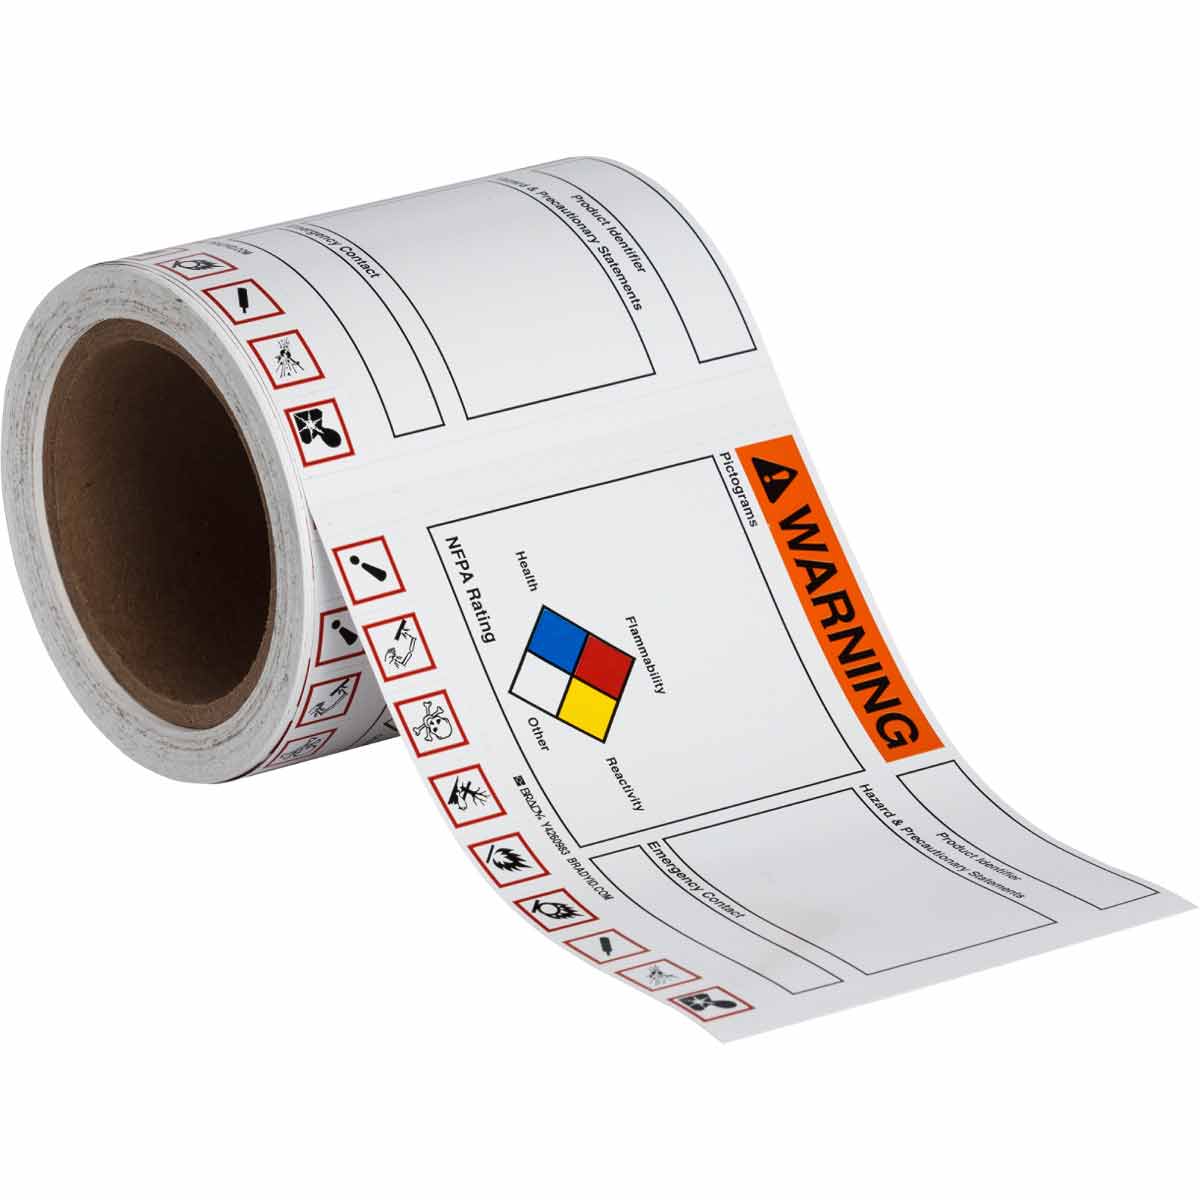 39 Labels 5/8 Height x 5/8 Width 5/8 Height x 5/8 Width Pictogram Severe Toxic Pictogram Severe Toxic 39 Labels, 1 Card per Package Black/Red On White Brady 118899 Coated Paper GHS Severe Toxic Picto Labels 